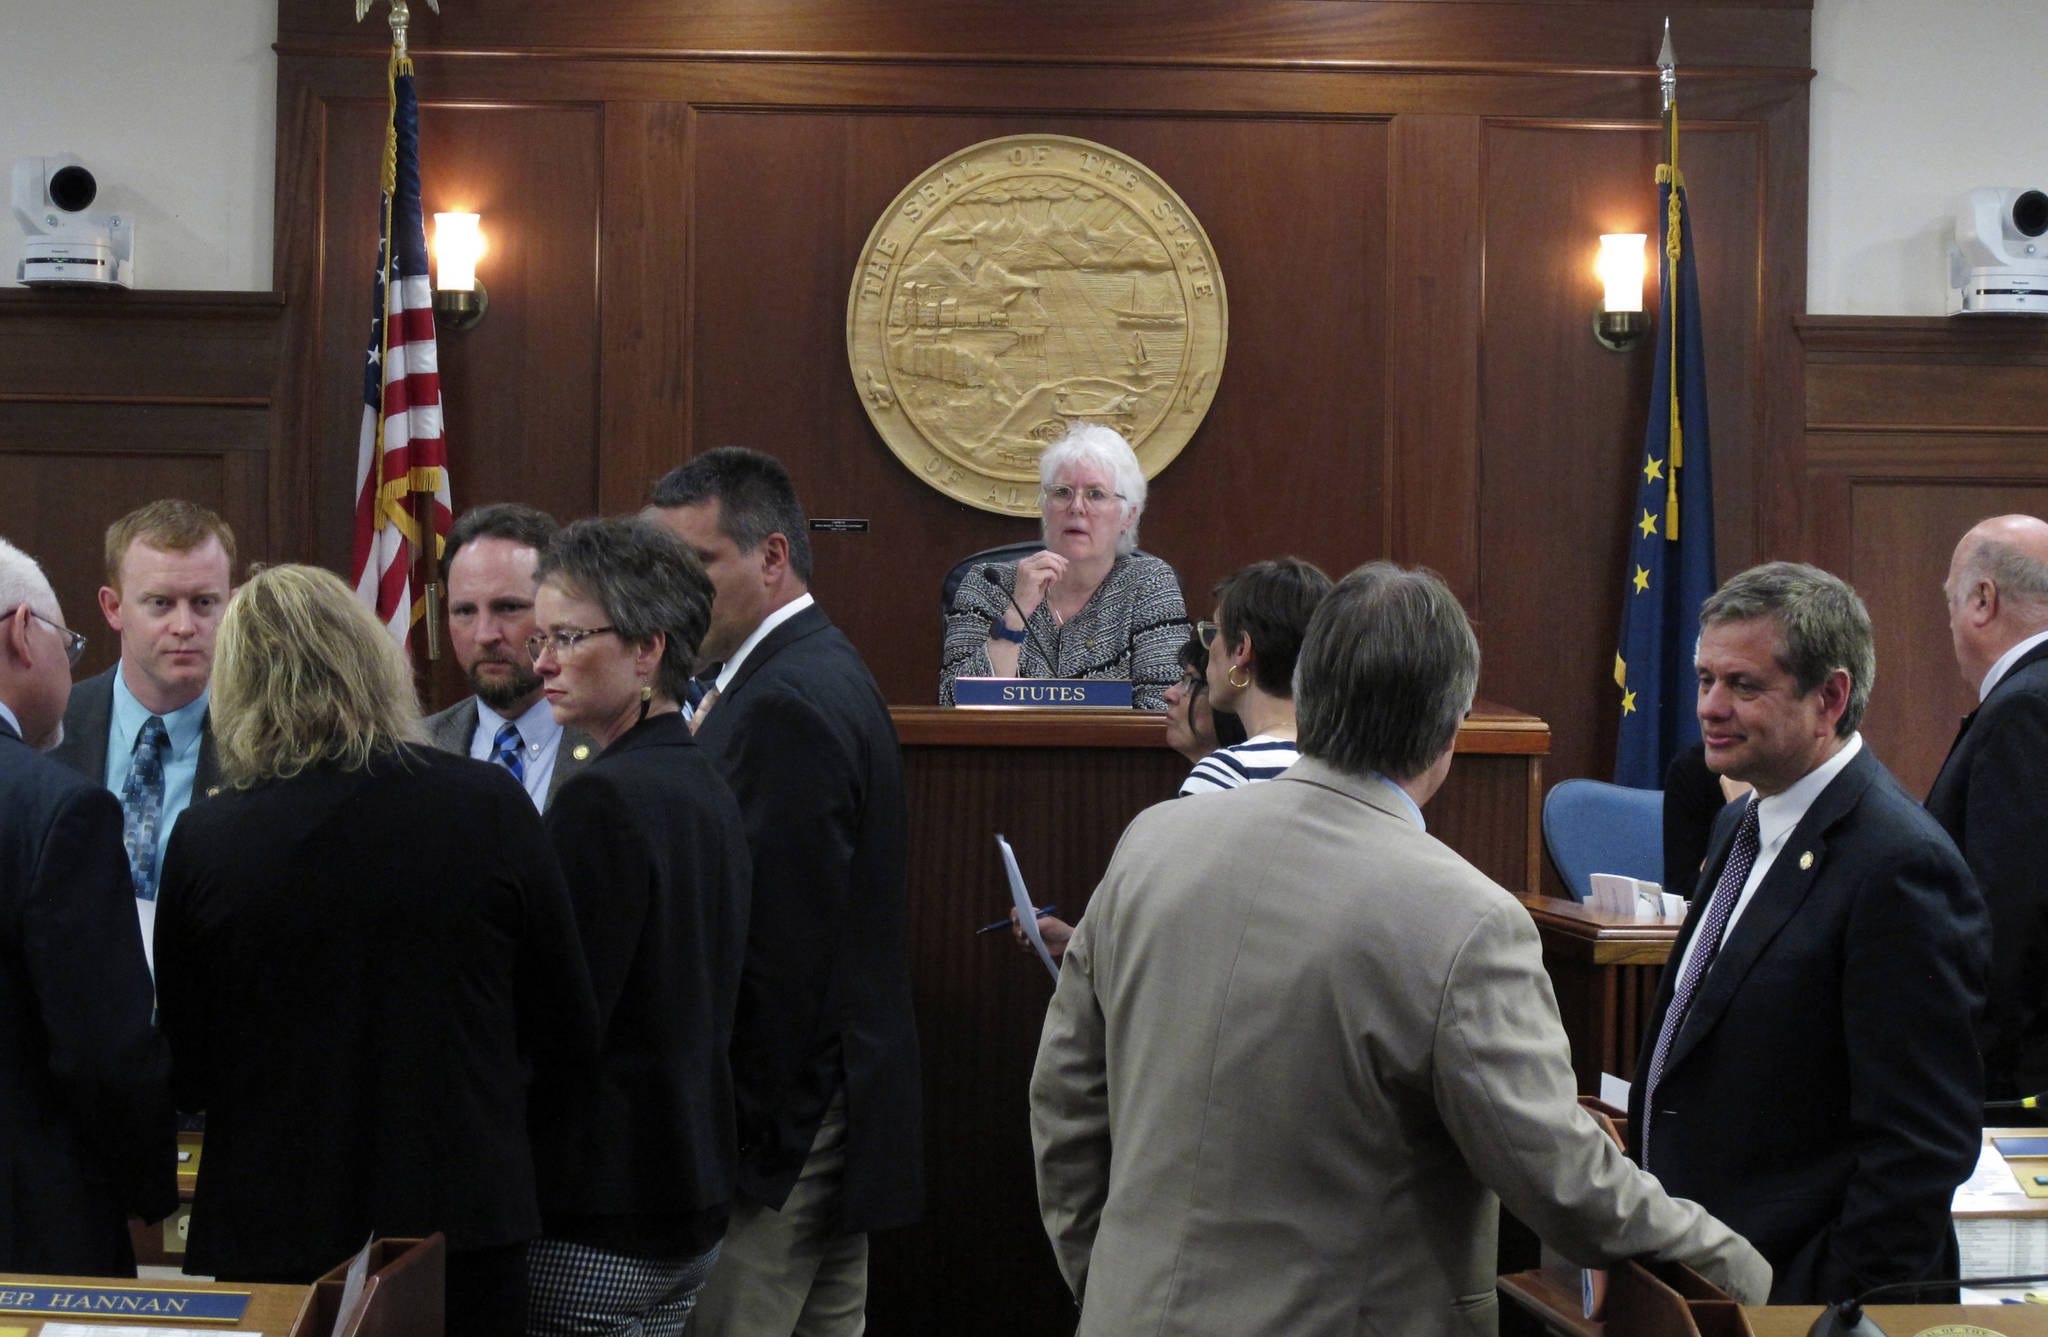 Alaska House Speaker Louise Stutes, center, looks on as groups of legislators meet on the House floor on Monday, June 28, 2021, in Juneau, Alaska. The Alaska Legislature ended its second special session on Monday, after the House acted to adopt effective date provisions attached to a state spending package in a move intended to avert a partial government shutdown. (AP Photo/Becky Bohrer)